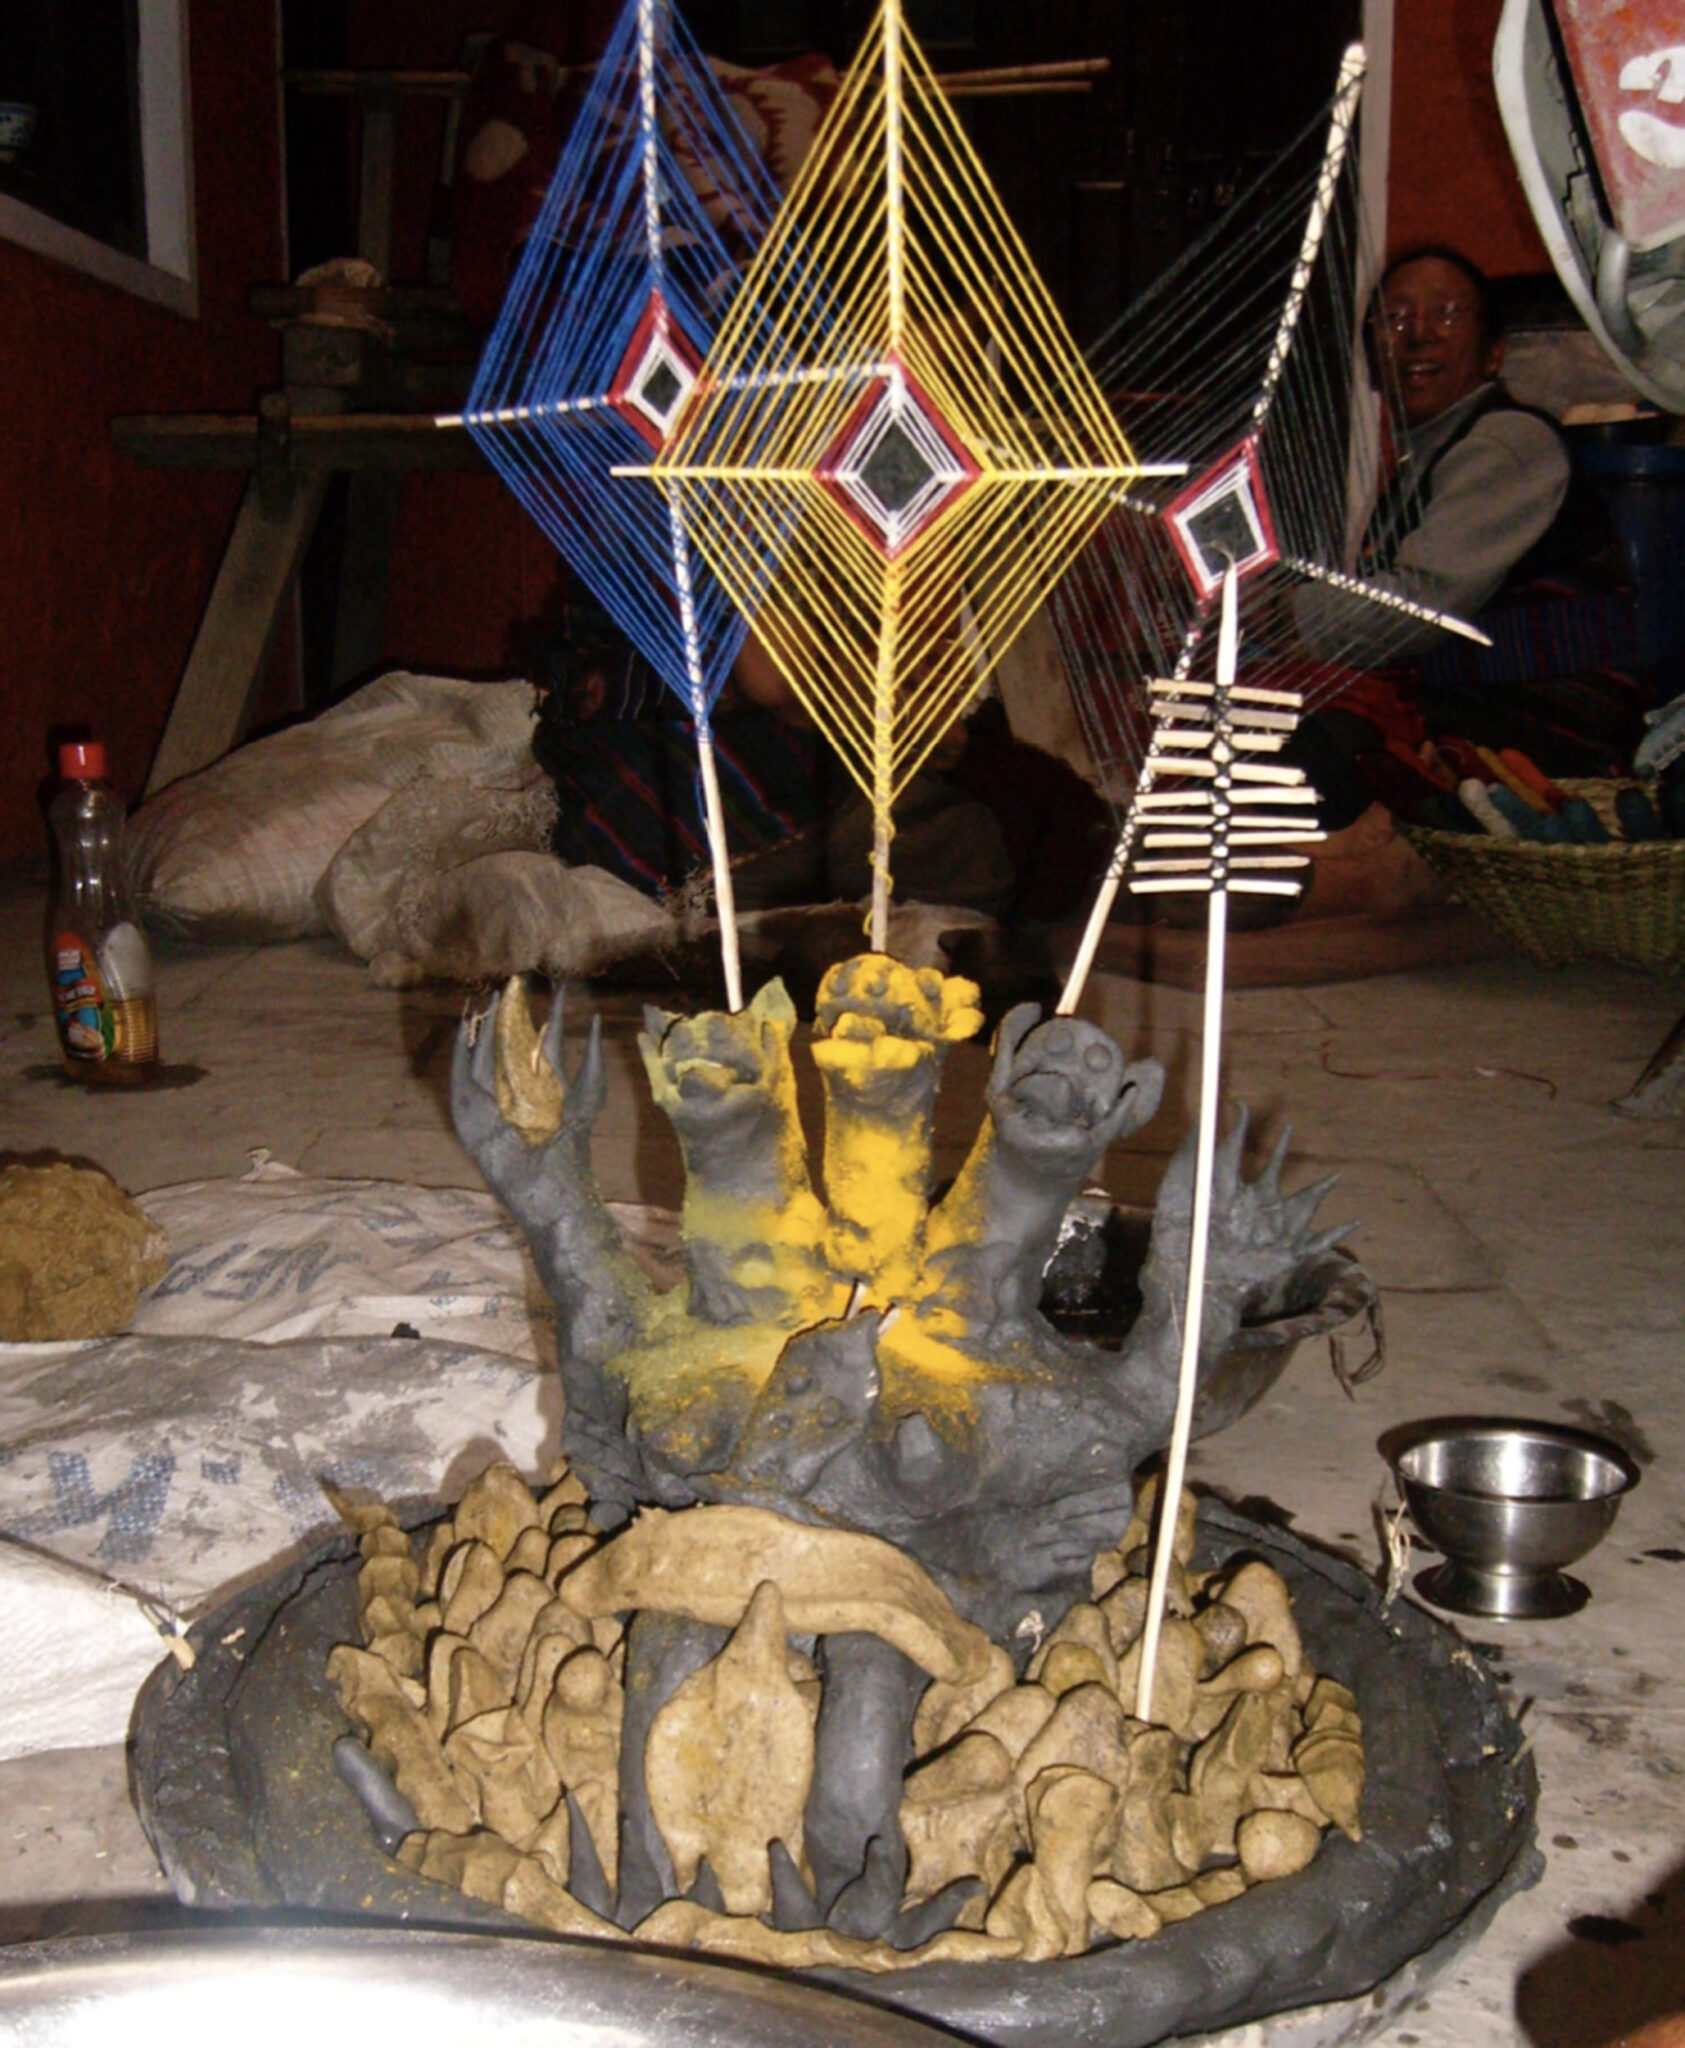 Effigy of three-headed figure daubed with yellow pigment supporting three yarn-woven lozenges on sticks